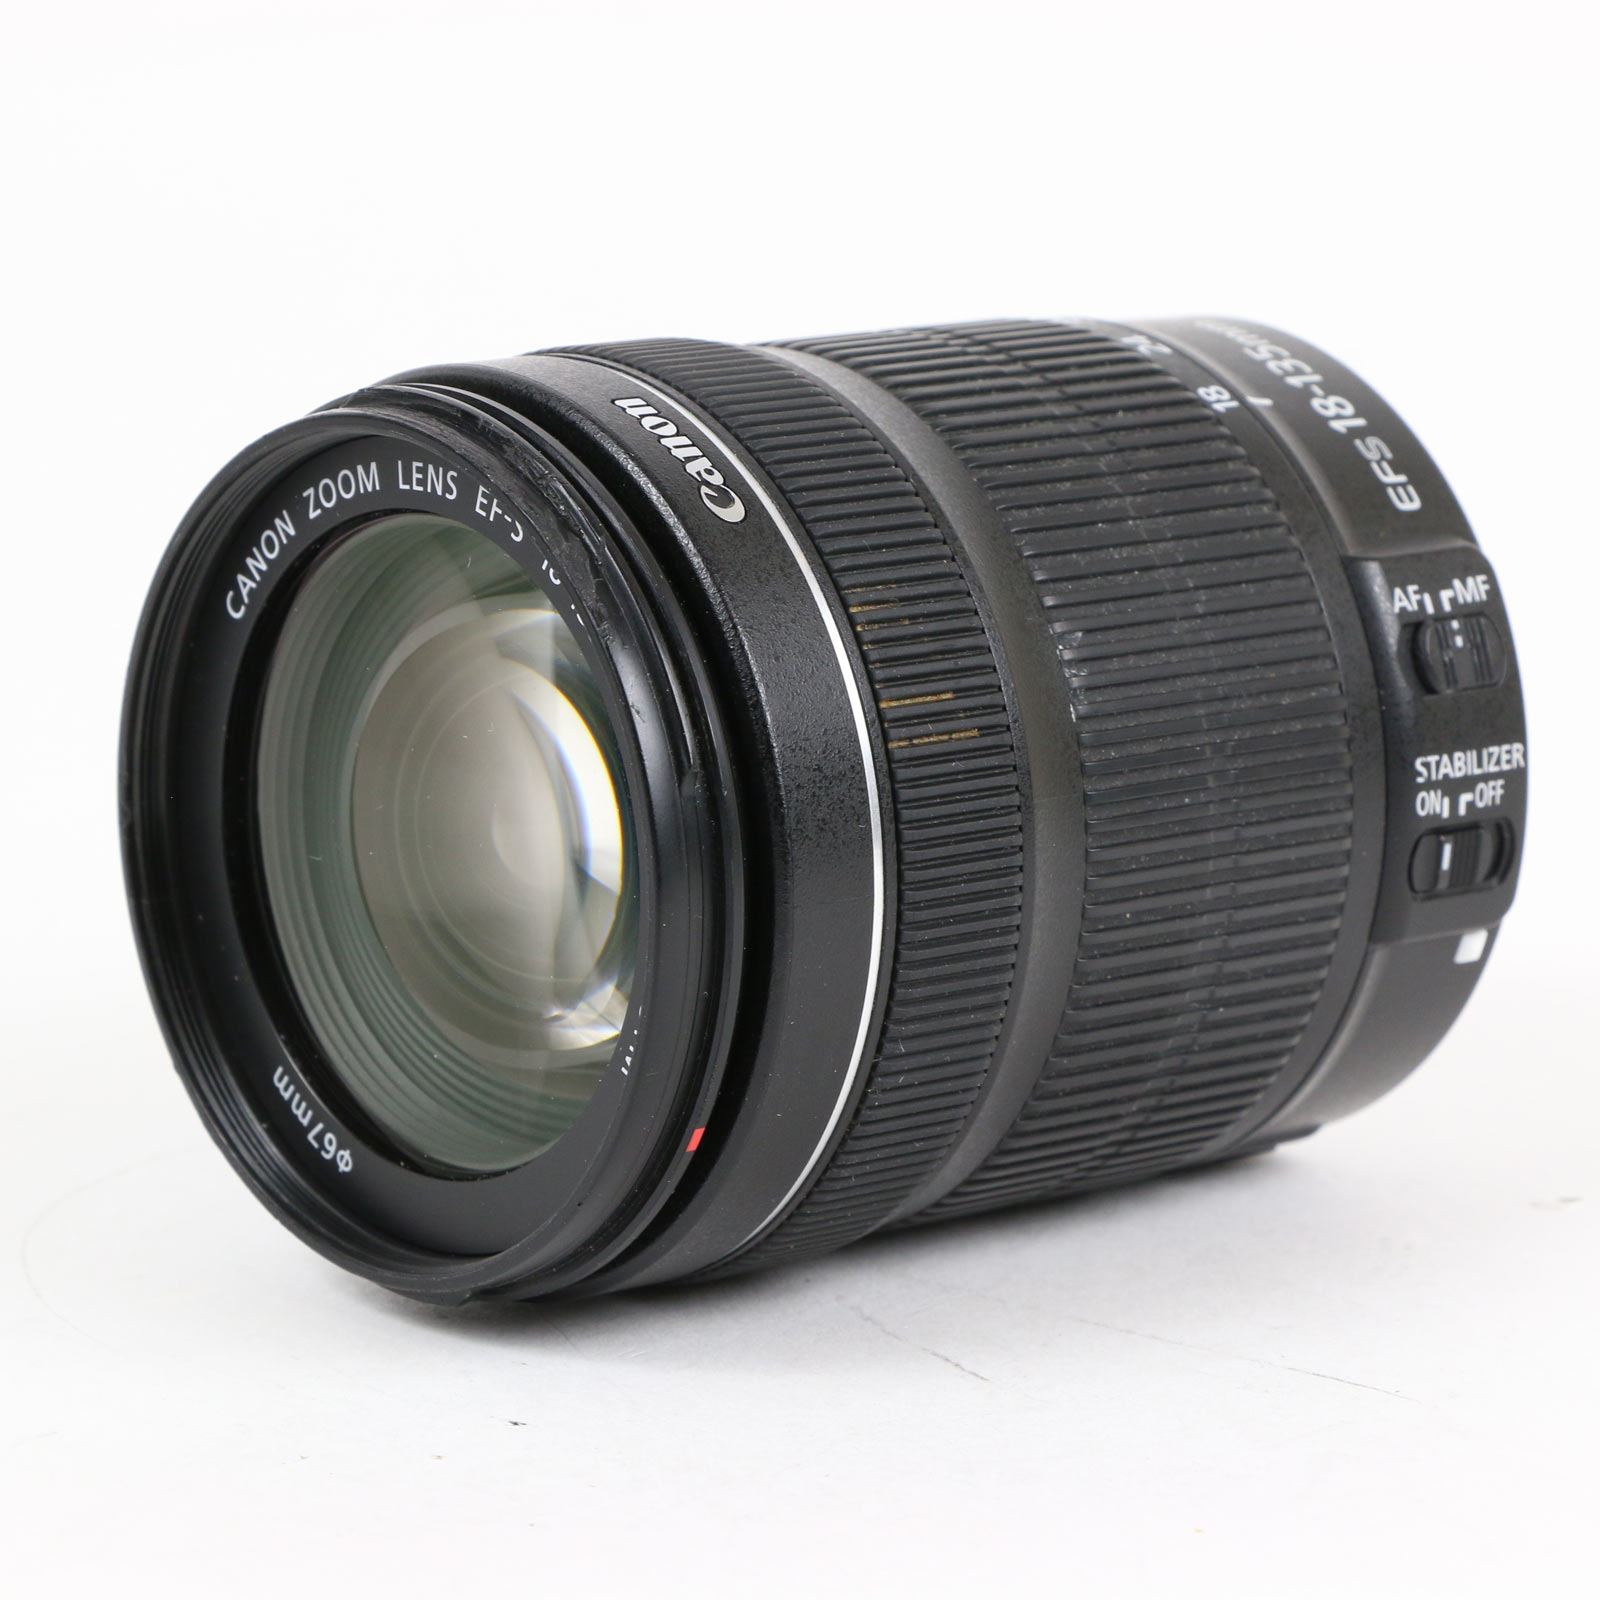 Canon EFS 18135mm f3.55.6 IS STM Lens Wex Photo Video